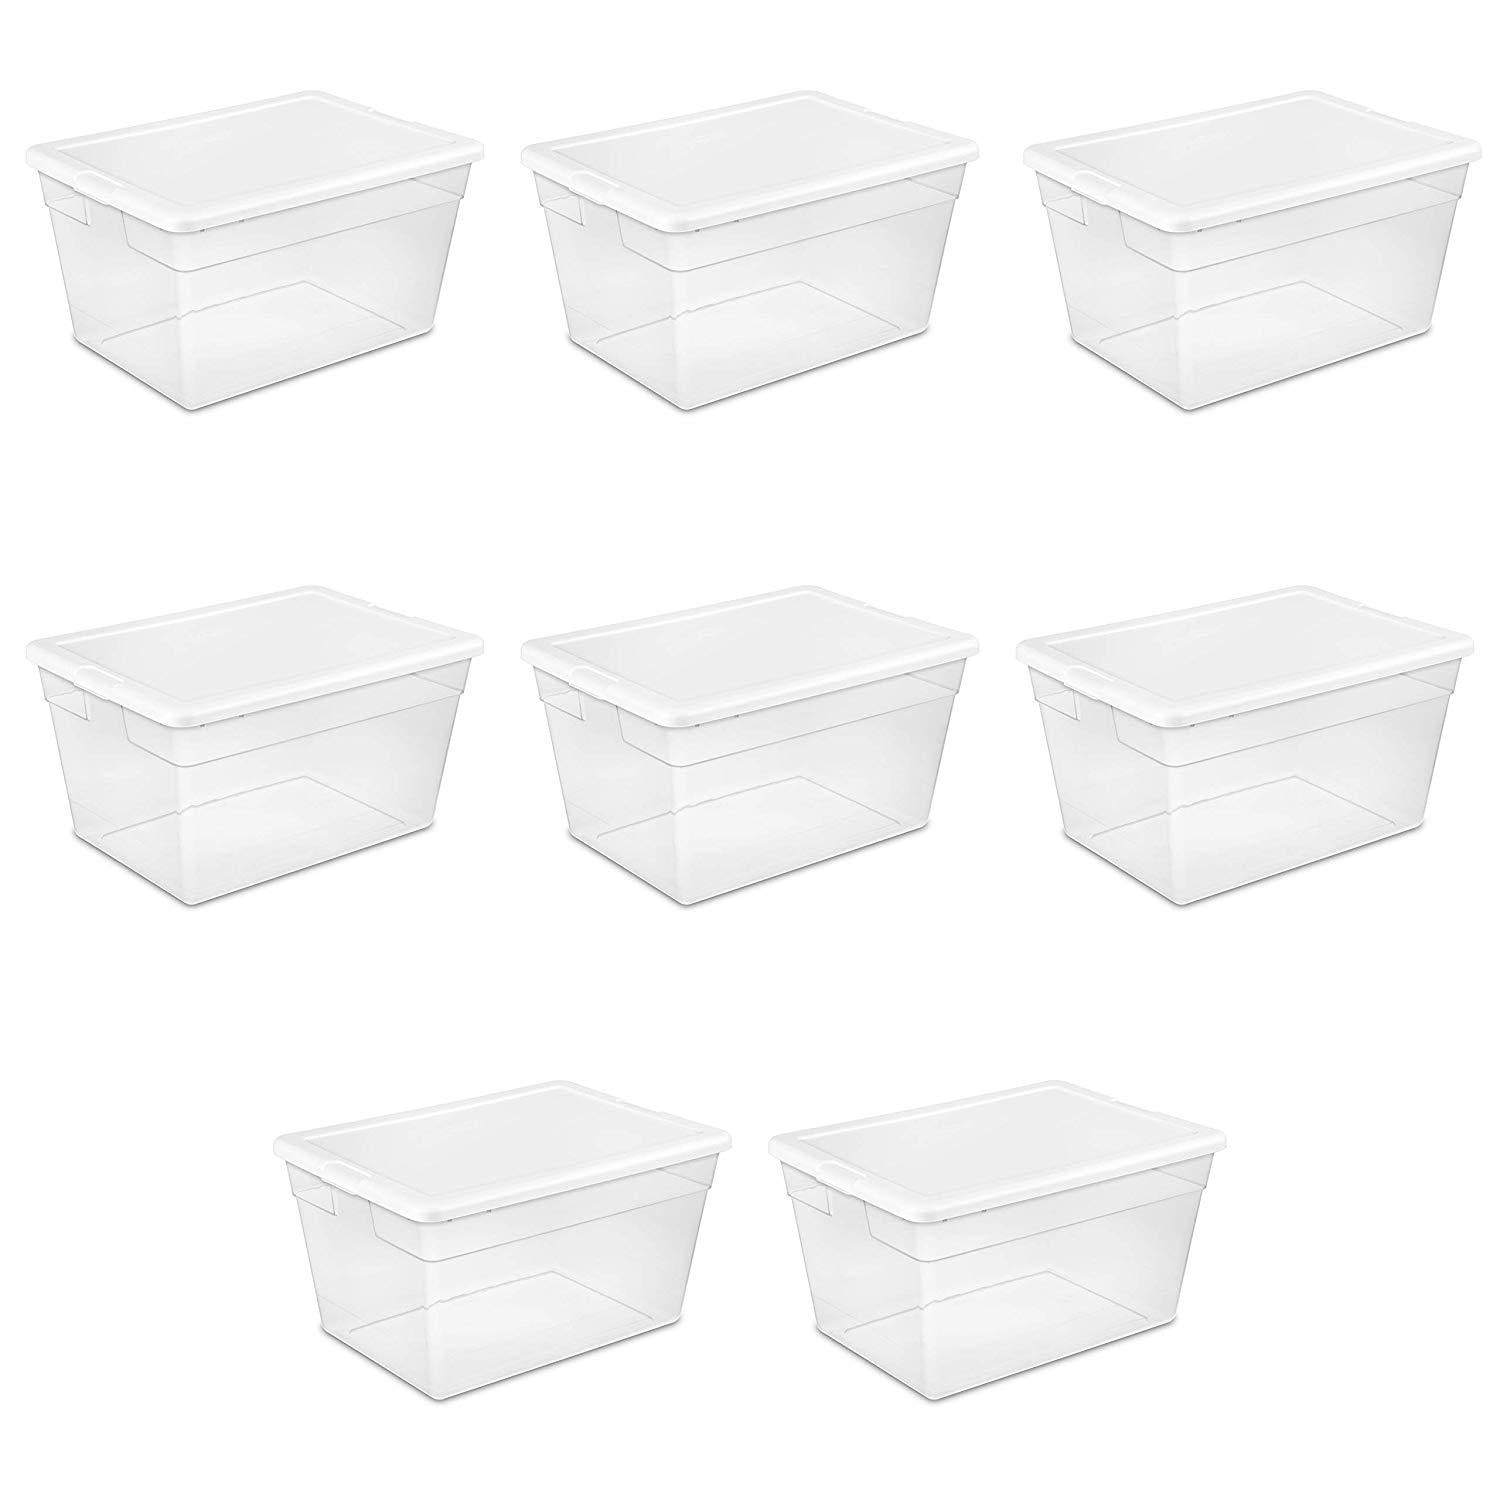 6 Wholesale Home Basics 30 Liter Plastic Storage Container With Lid, Clear